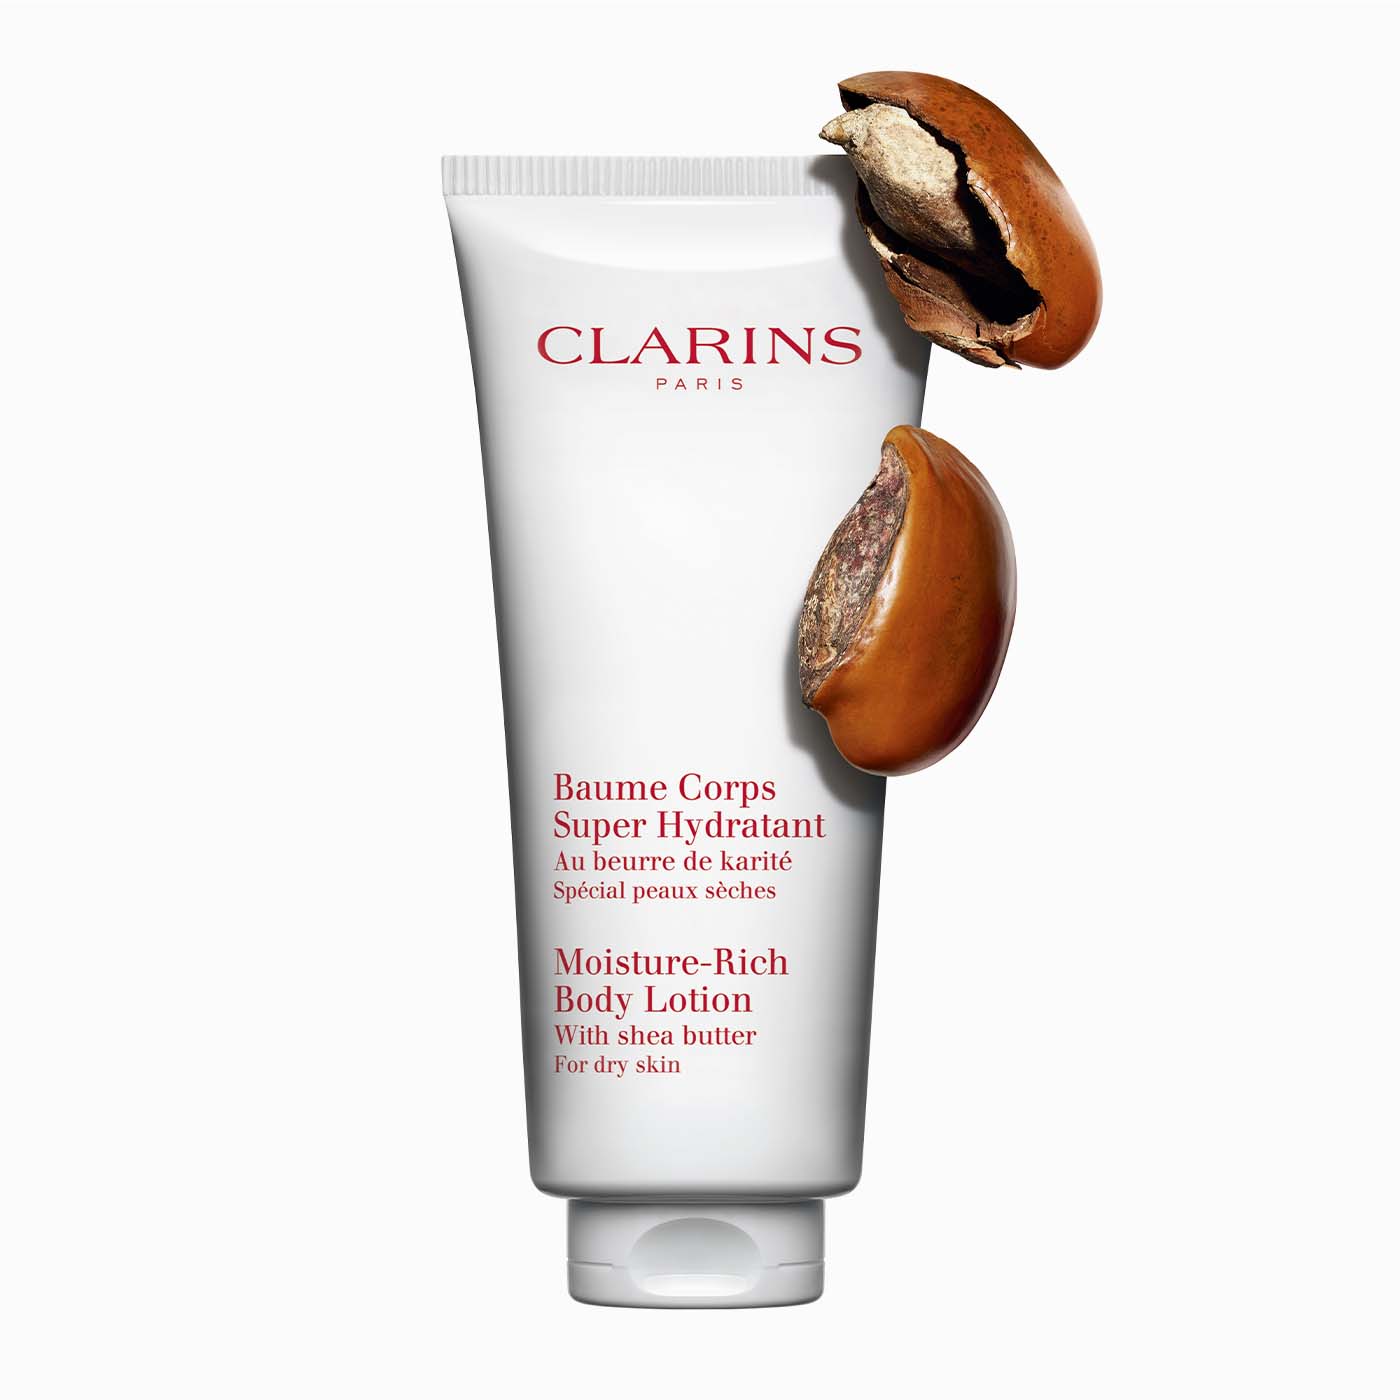 Moisture-Rich Body Lotion | Non-Greasy Lotion Luxury | CLARINS®